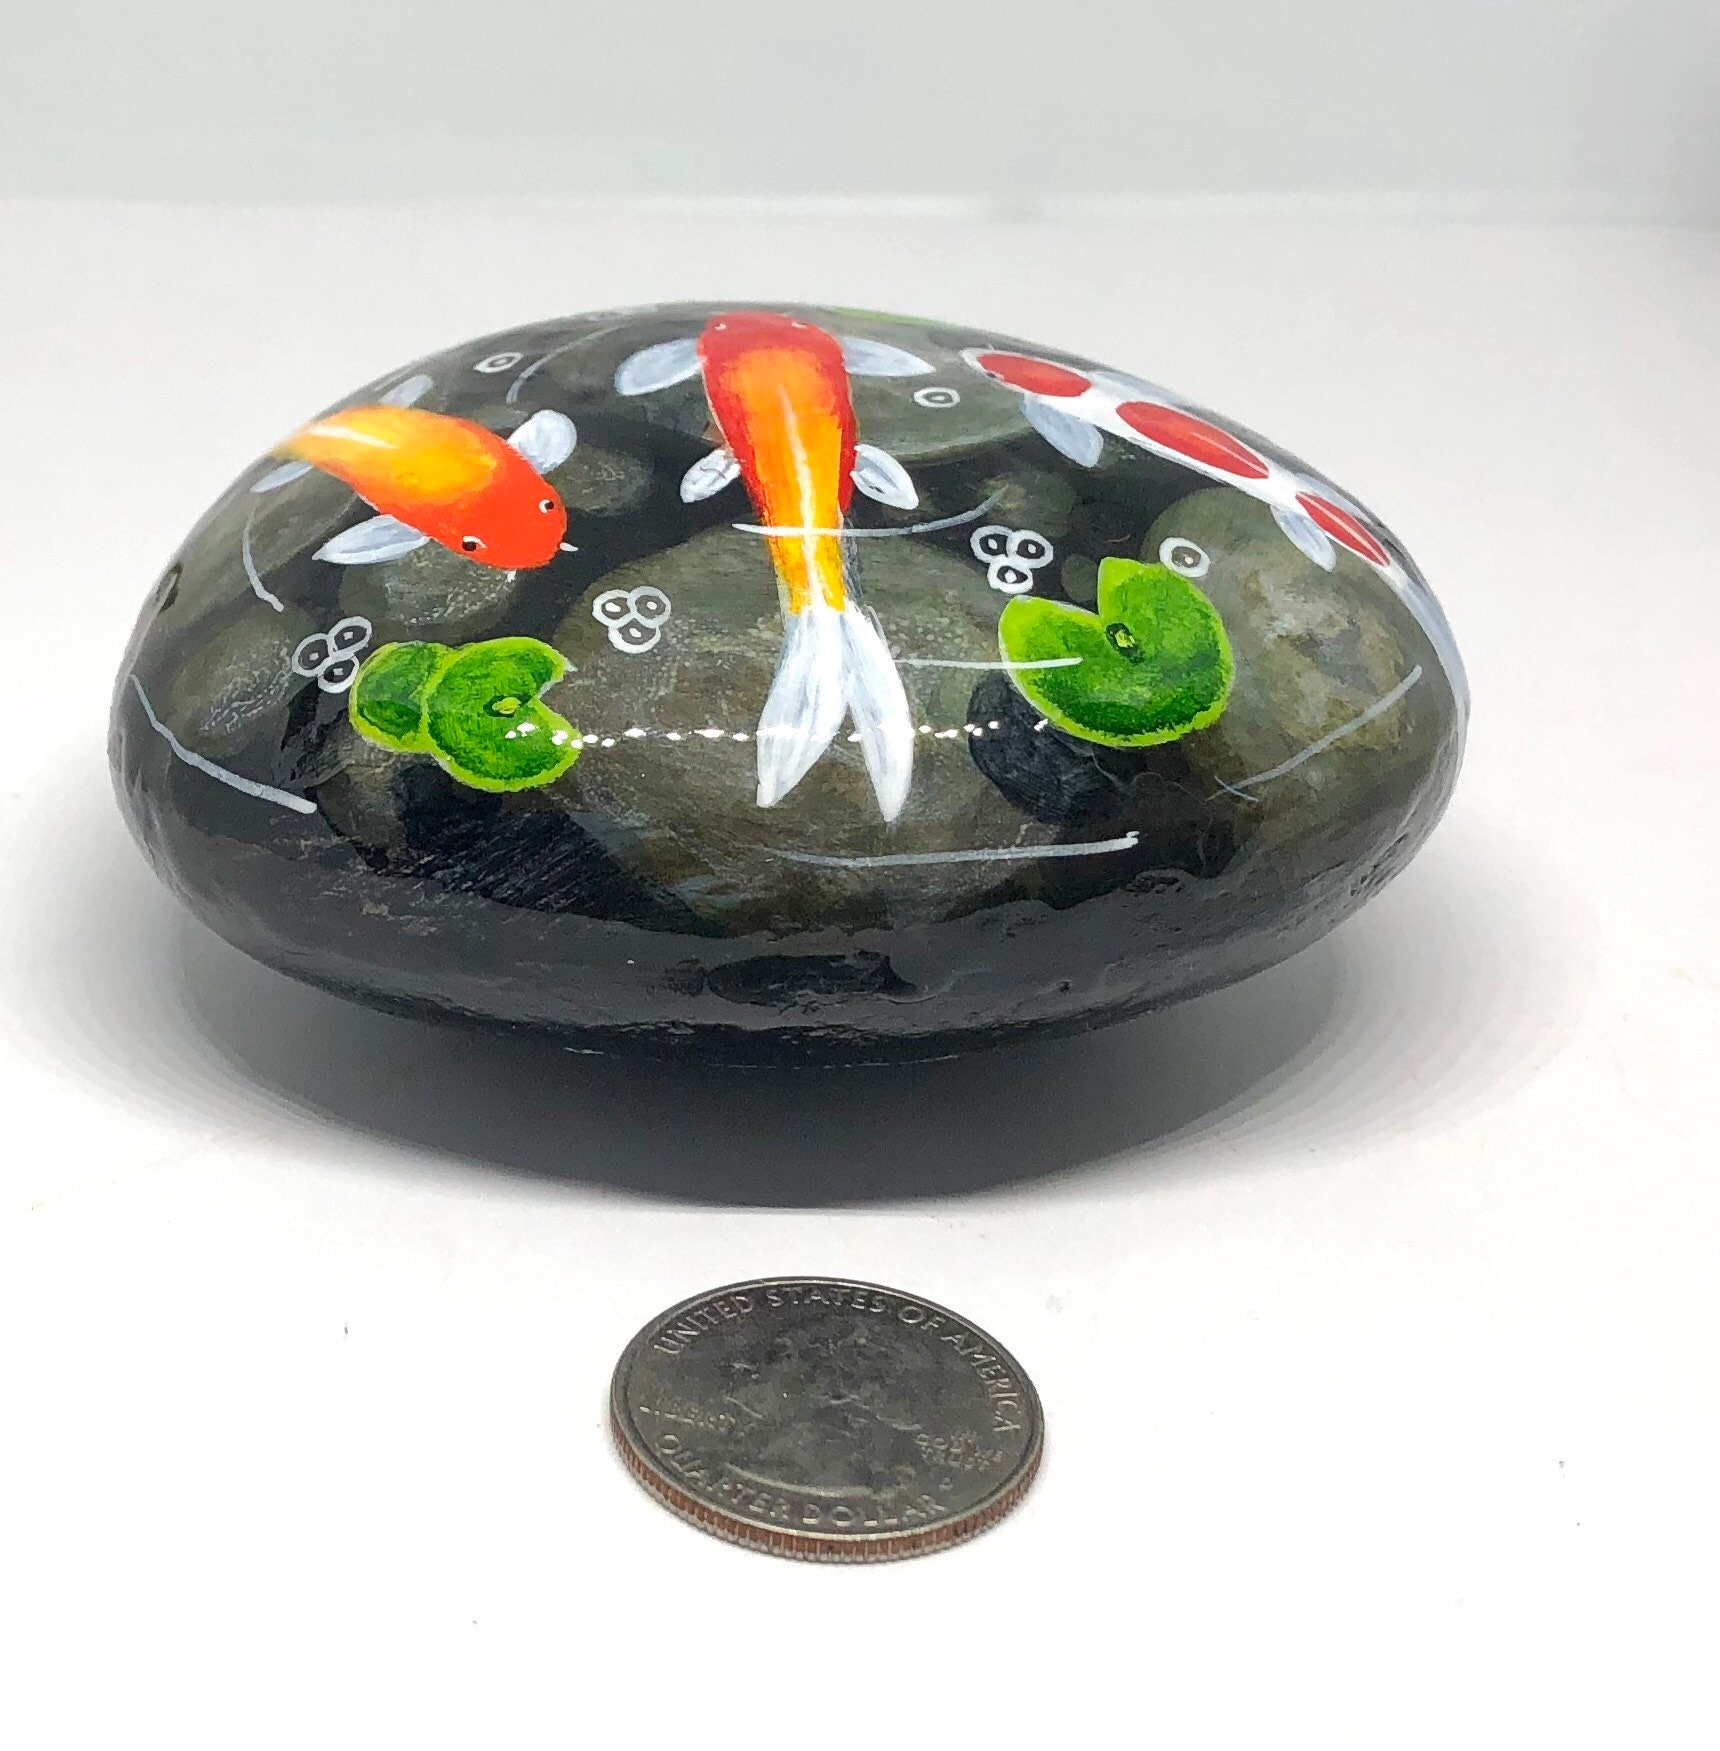 Koi pond painted rocks beautiful garden decor and unique | Etsy